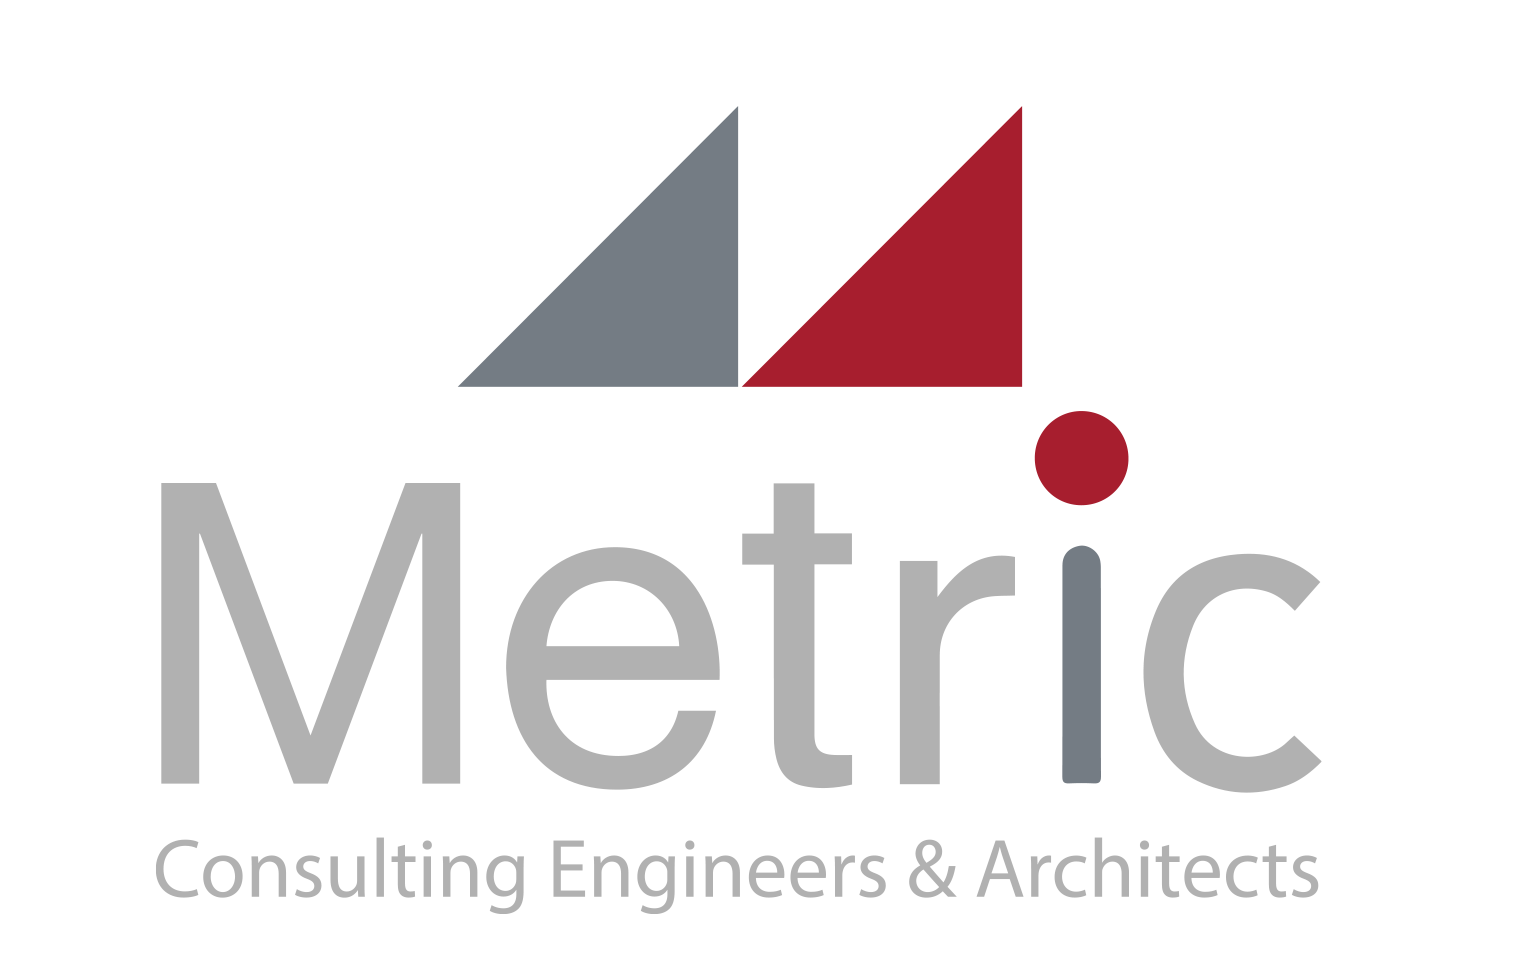 Metric Consulting Engineers & Architects Co.,Ltd.